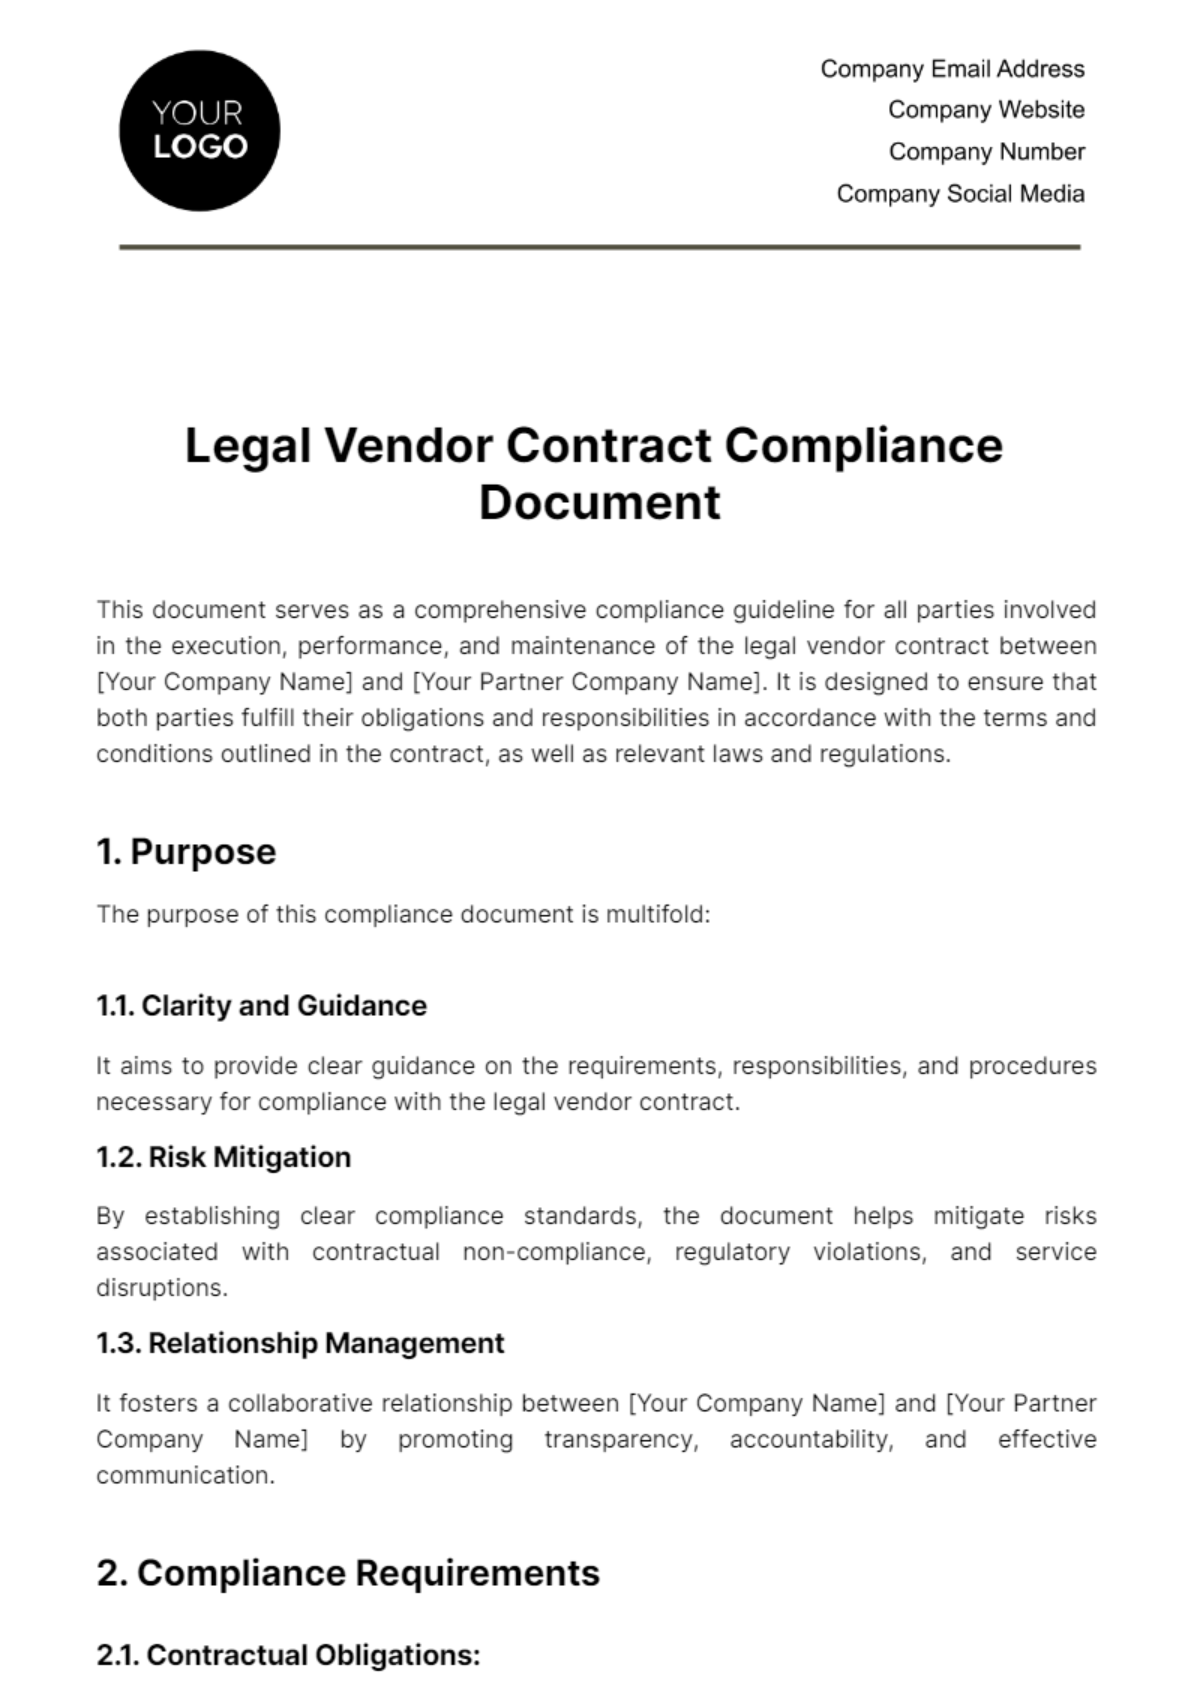 Free Legal Vendor Contract Compliance Document Template